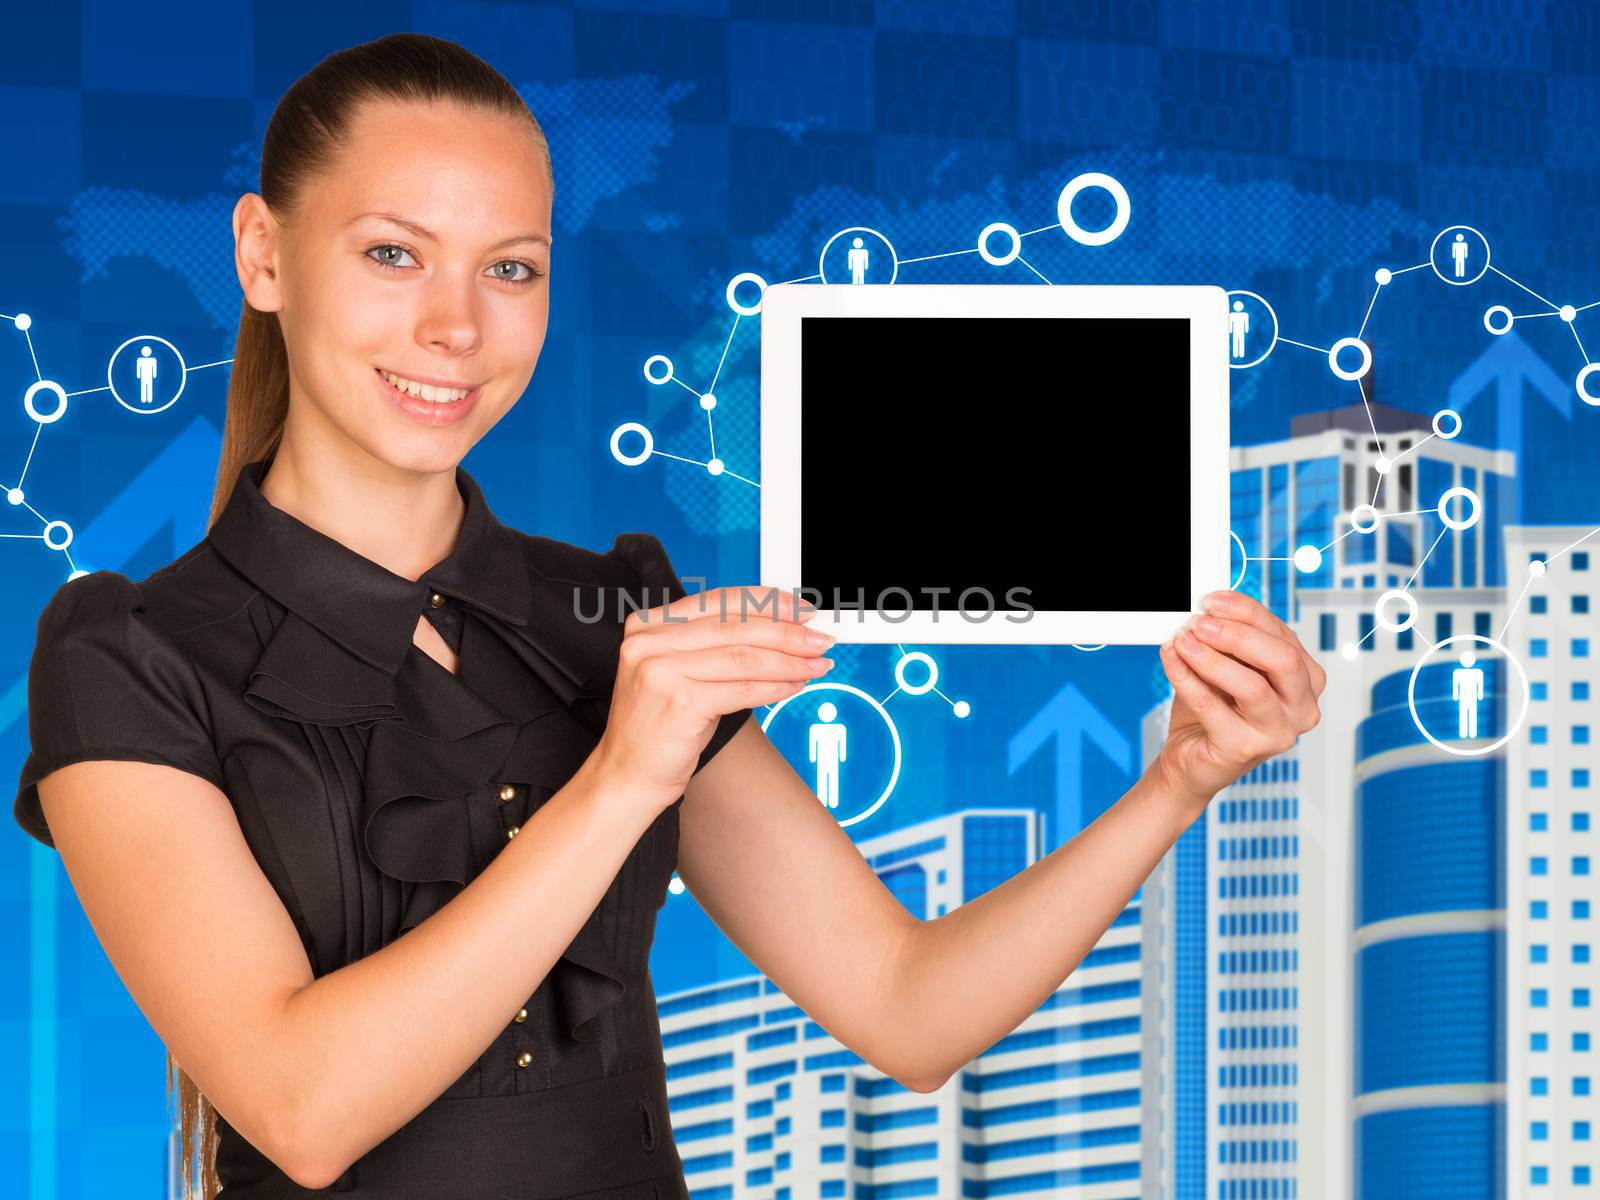 Beautiful businesswoman in dress smiling and holding tablet pc. Network with people icons, buildings and world map as backdrop